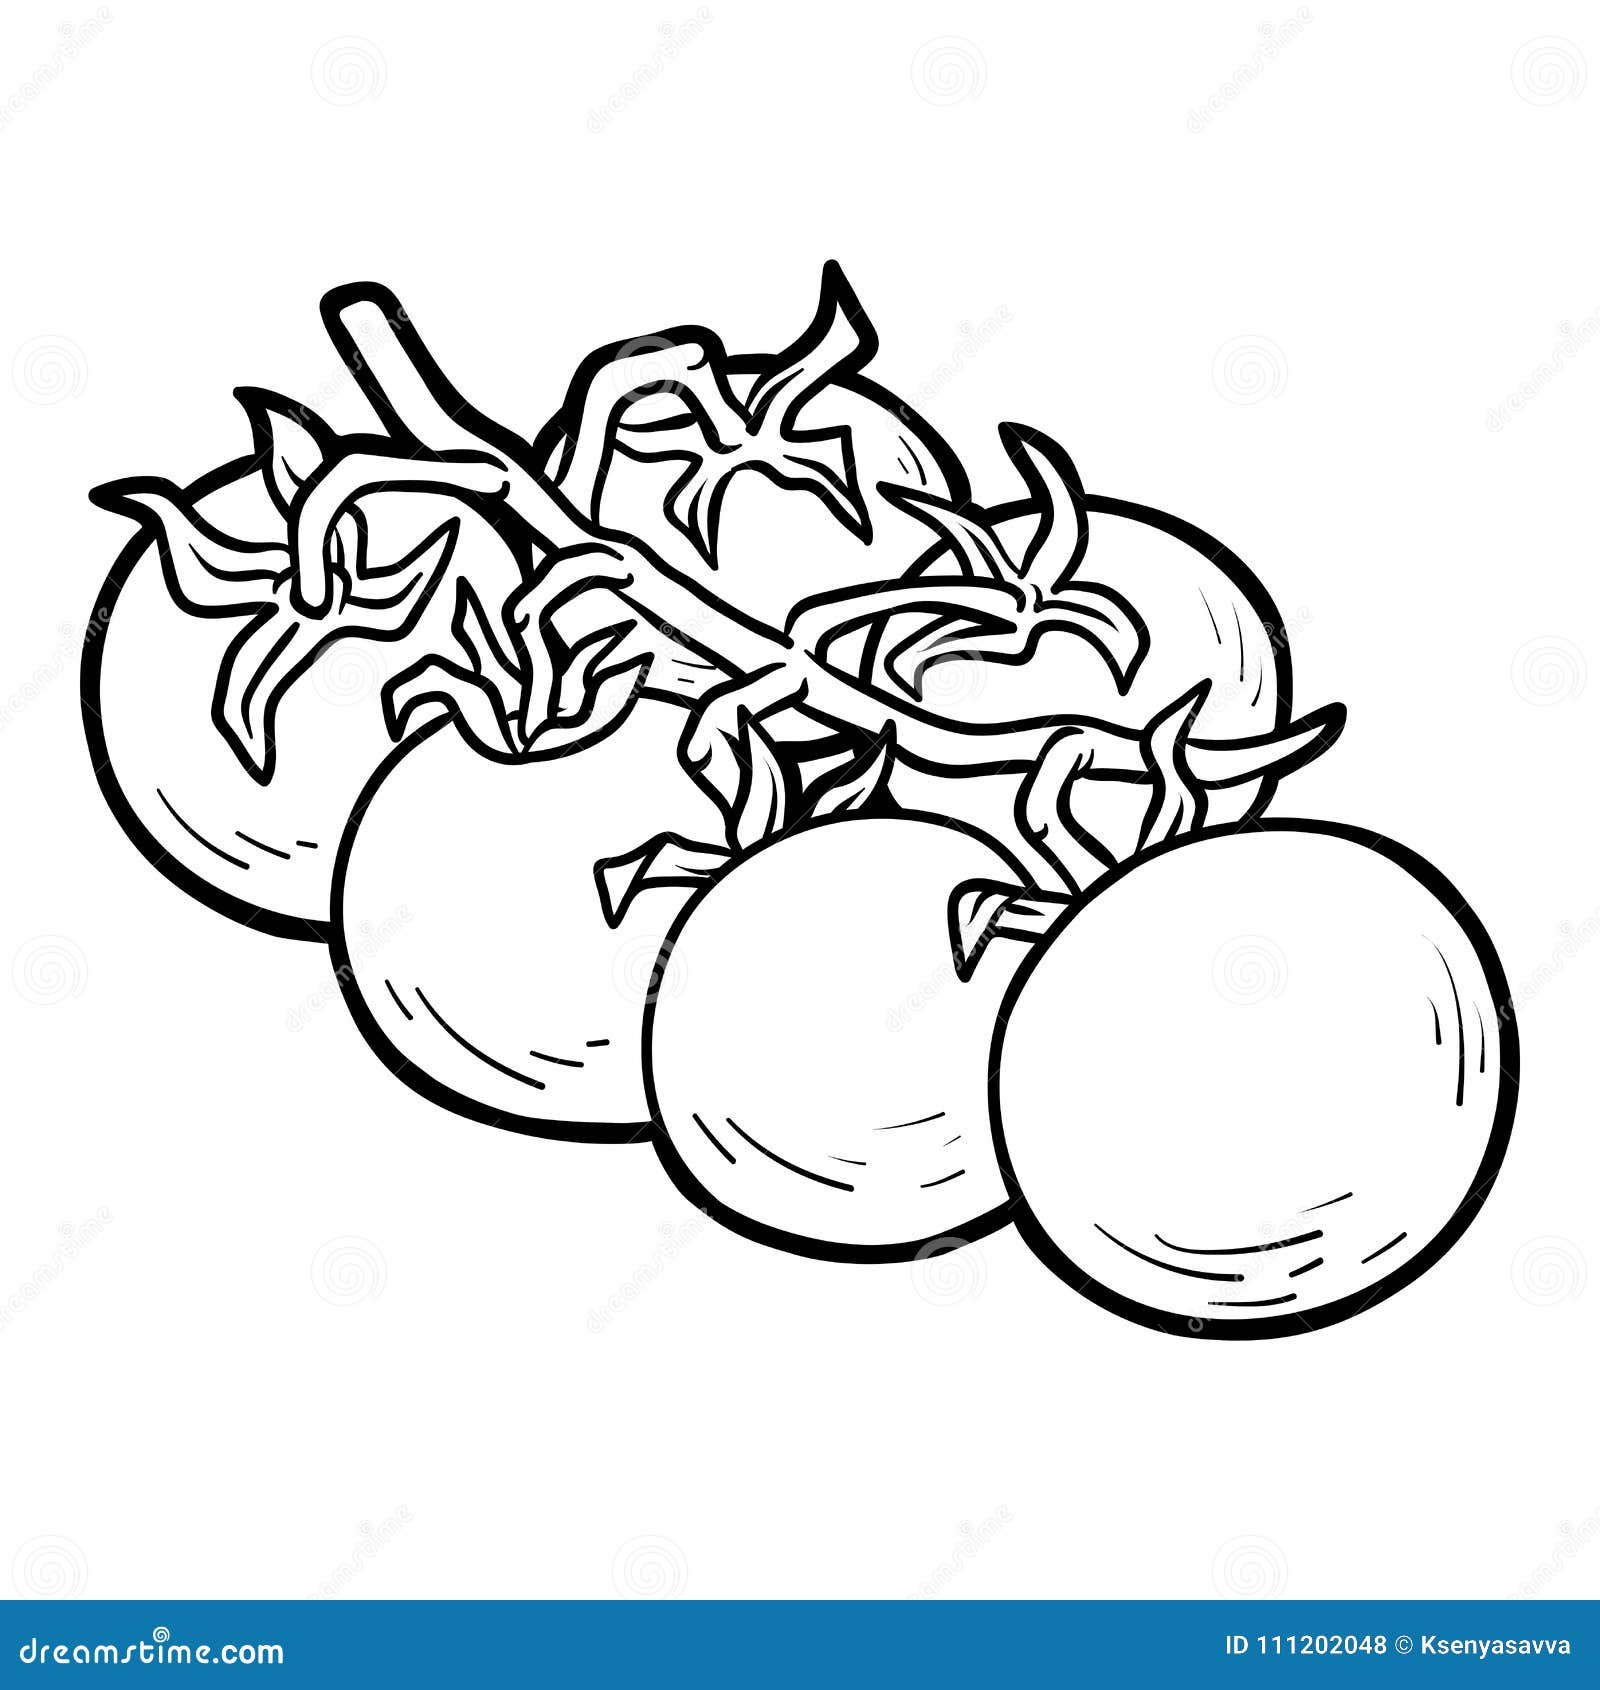 Coloring Book Cherry Tomatoes Stock Vector Illustration Of Outline Plant 111202048